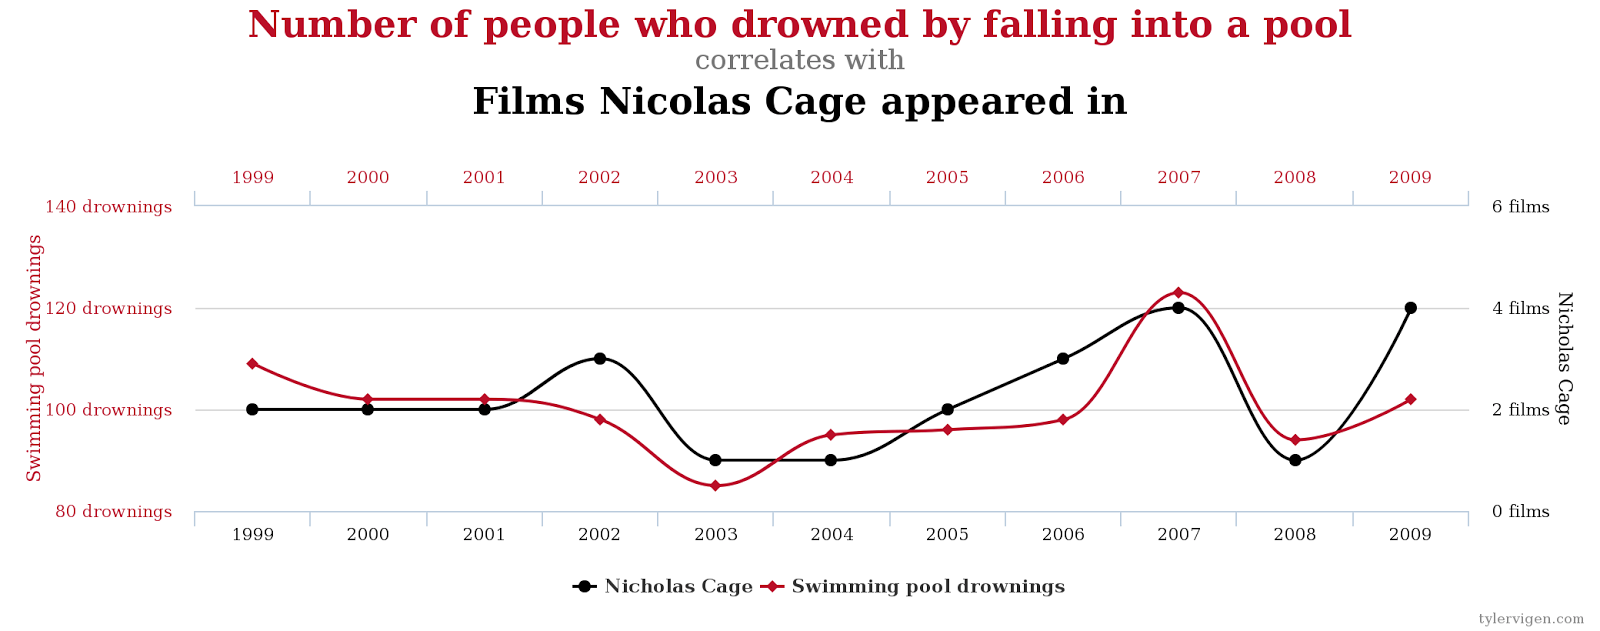 Sprurious correlations are all too easy to find.